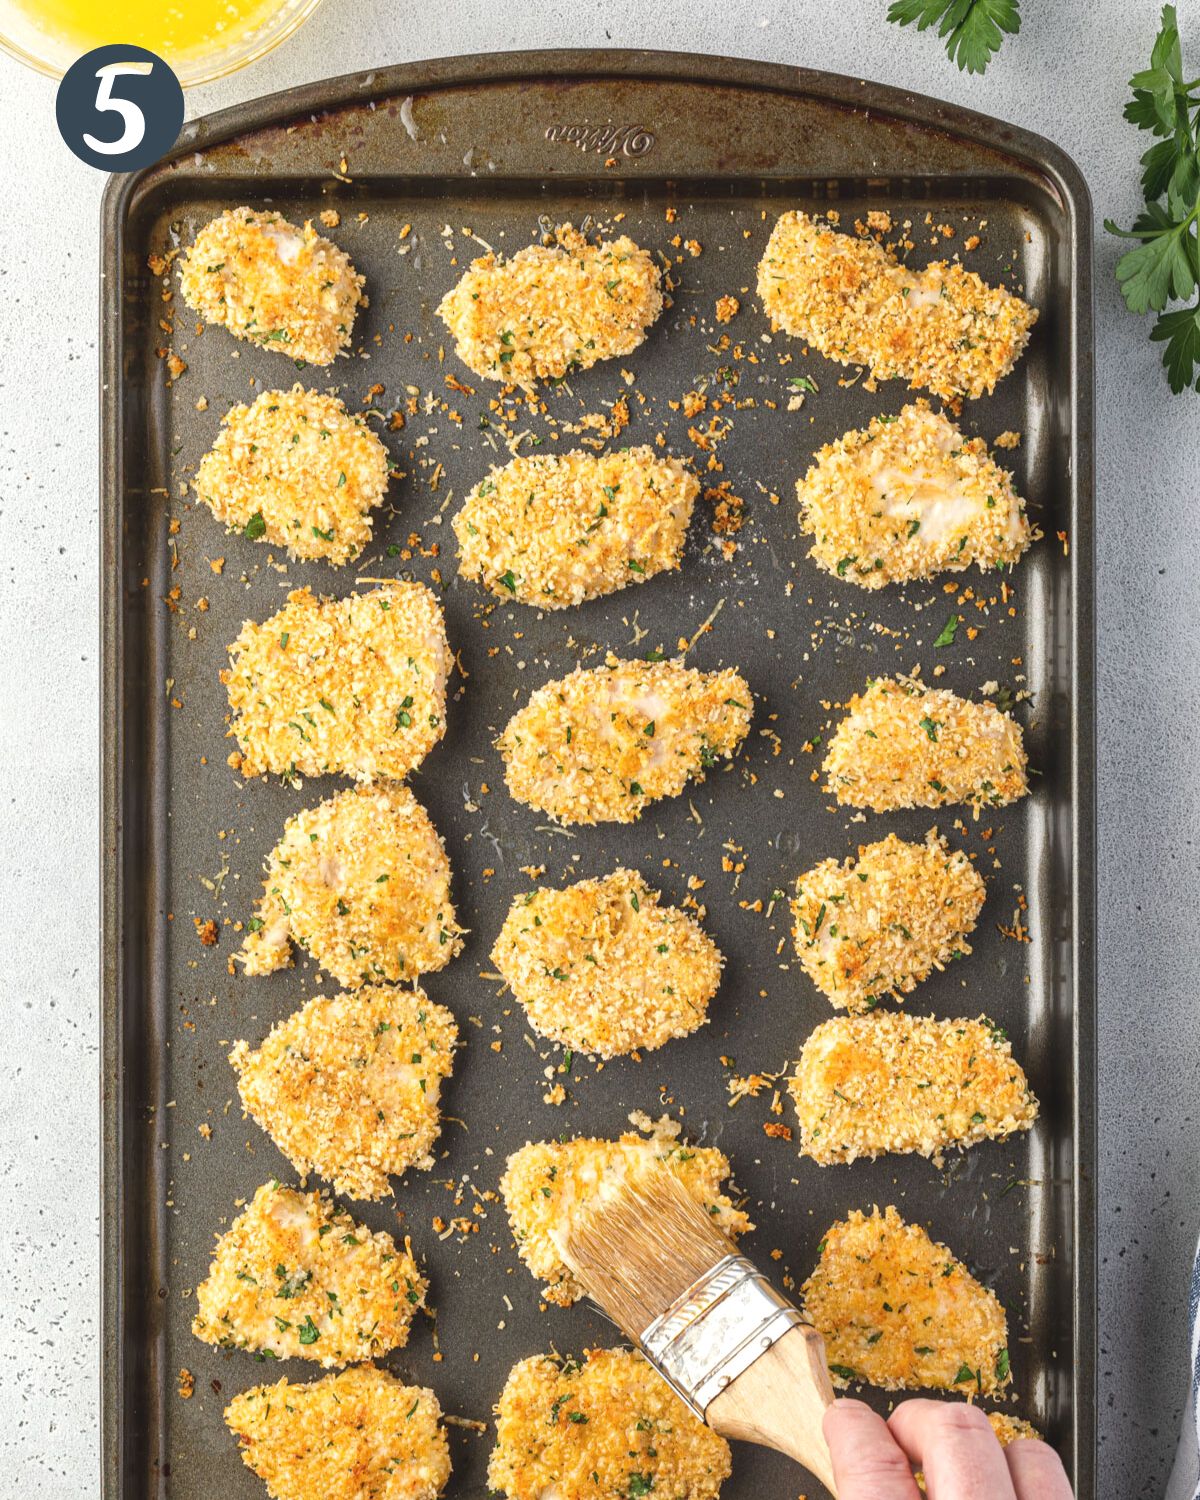 Brushing butter with a pastry brush onto a baking sheet of breaded chicken pieces.